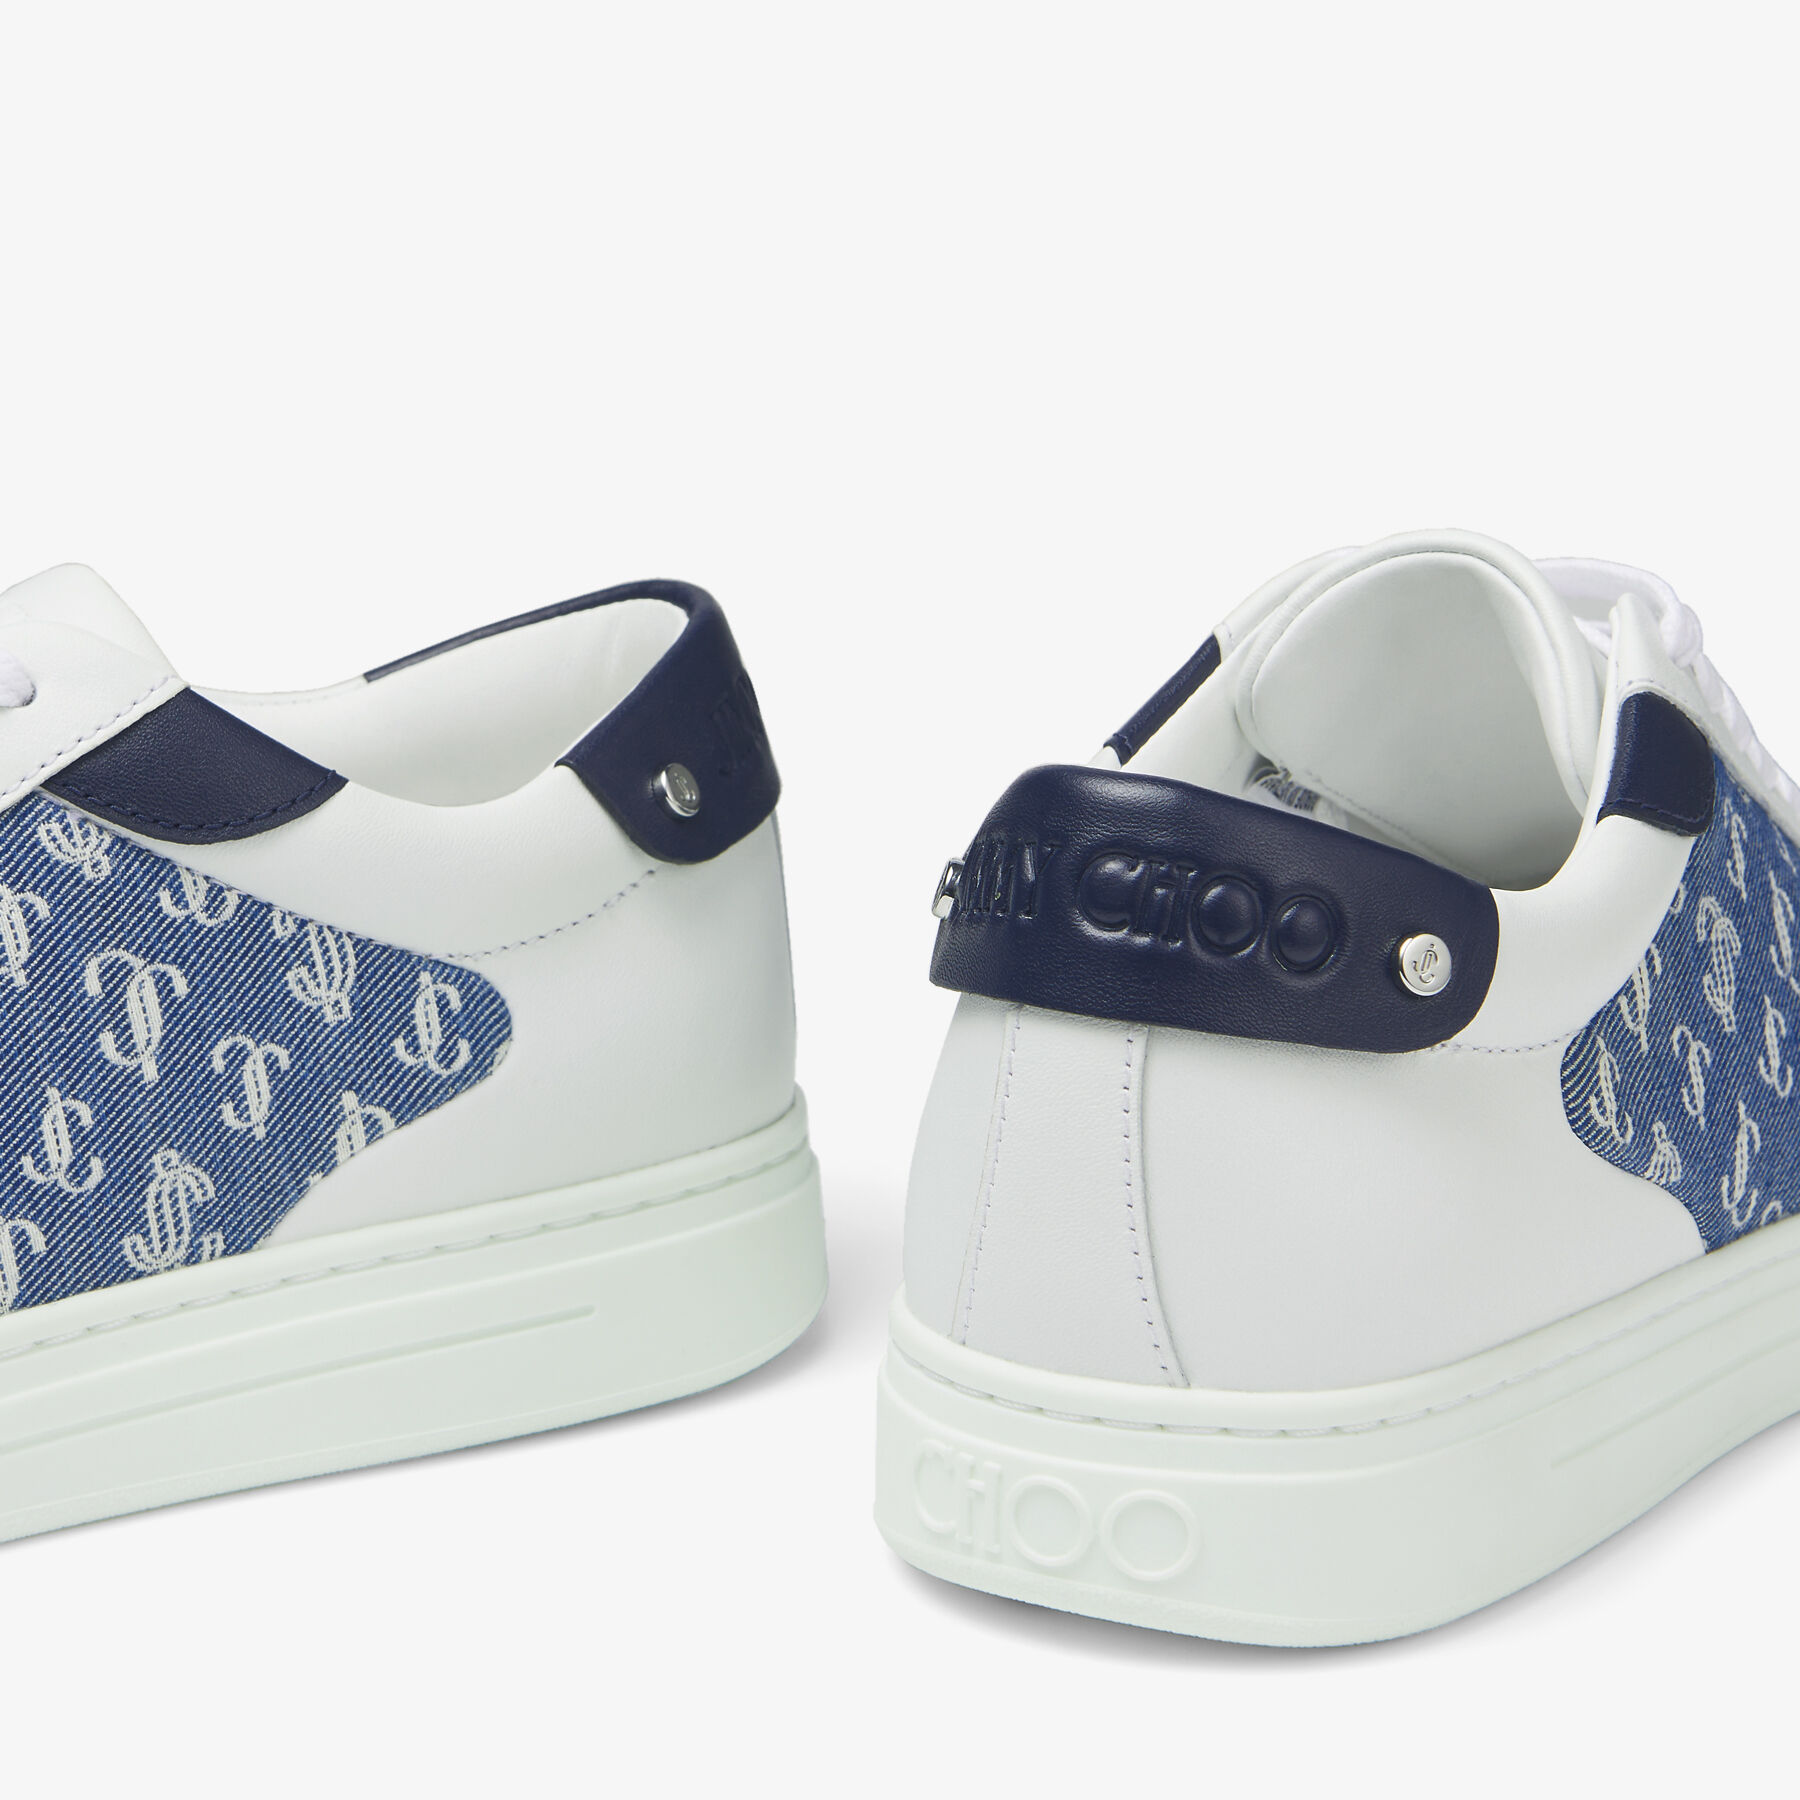 ROME/F | White Leather and Denim JC Monogram Pattern Low-Top 